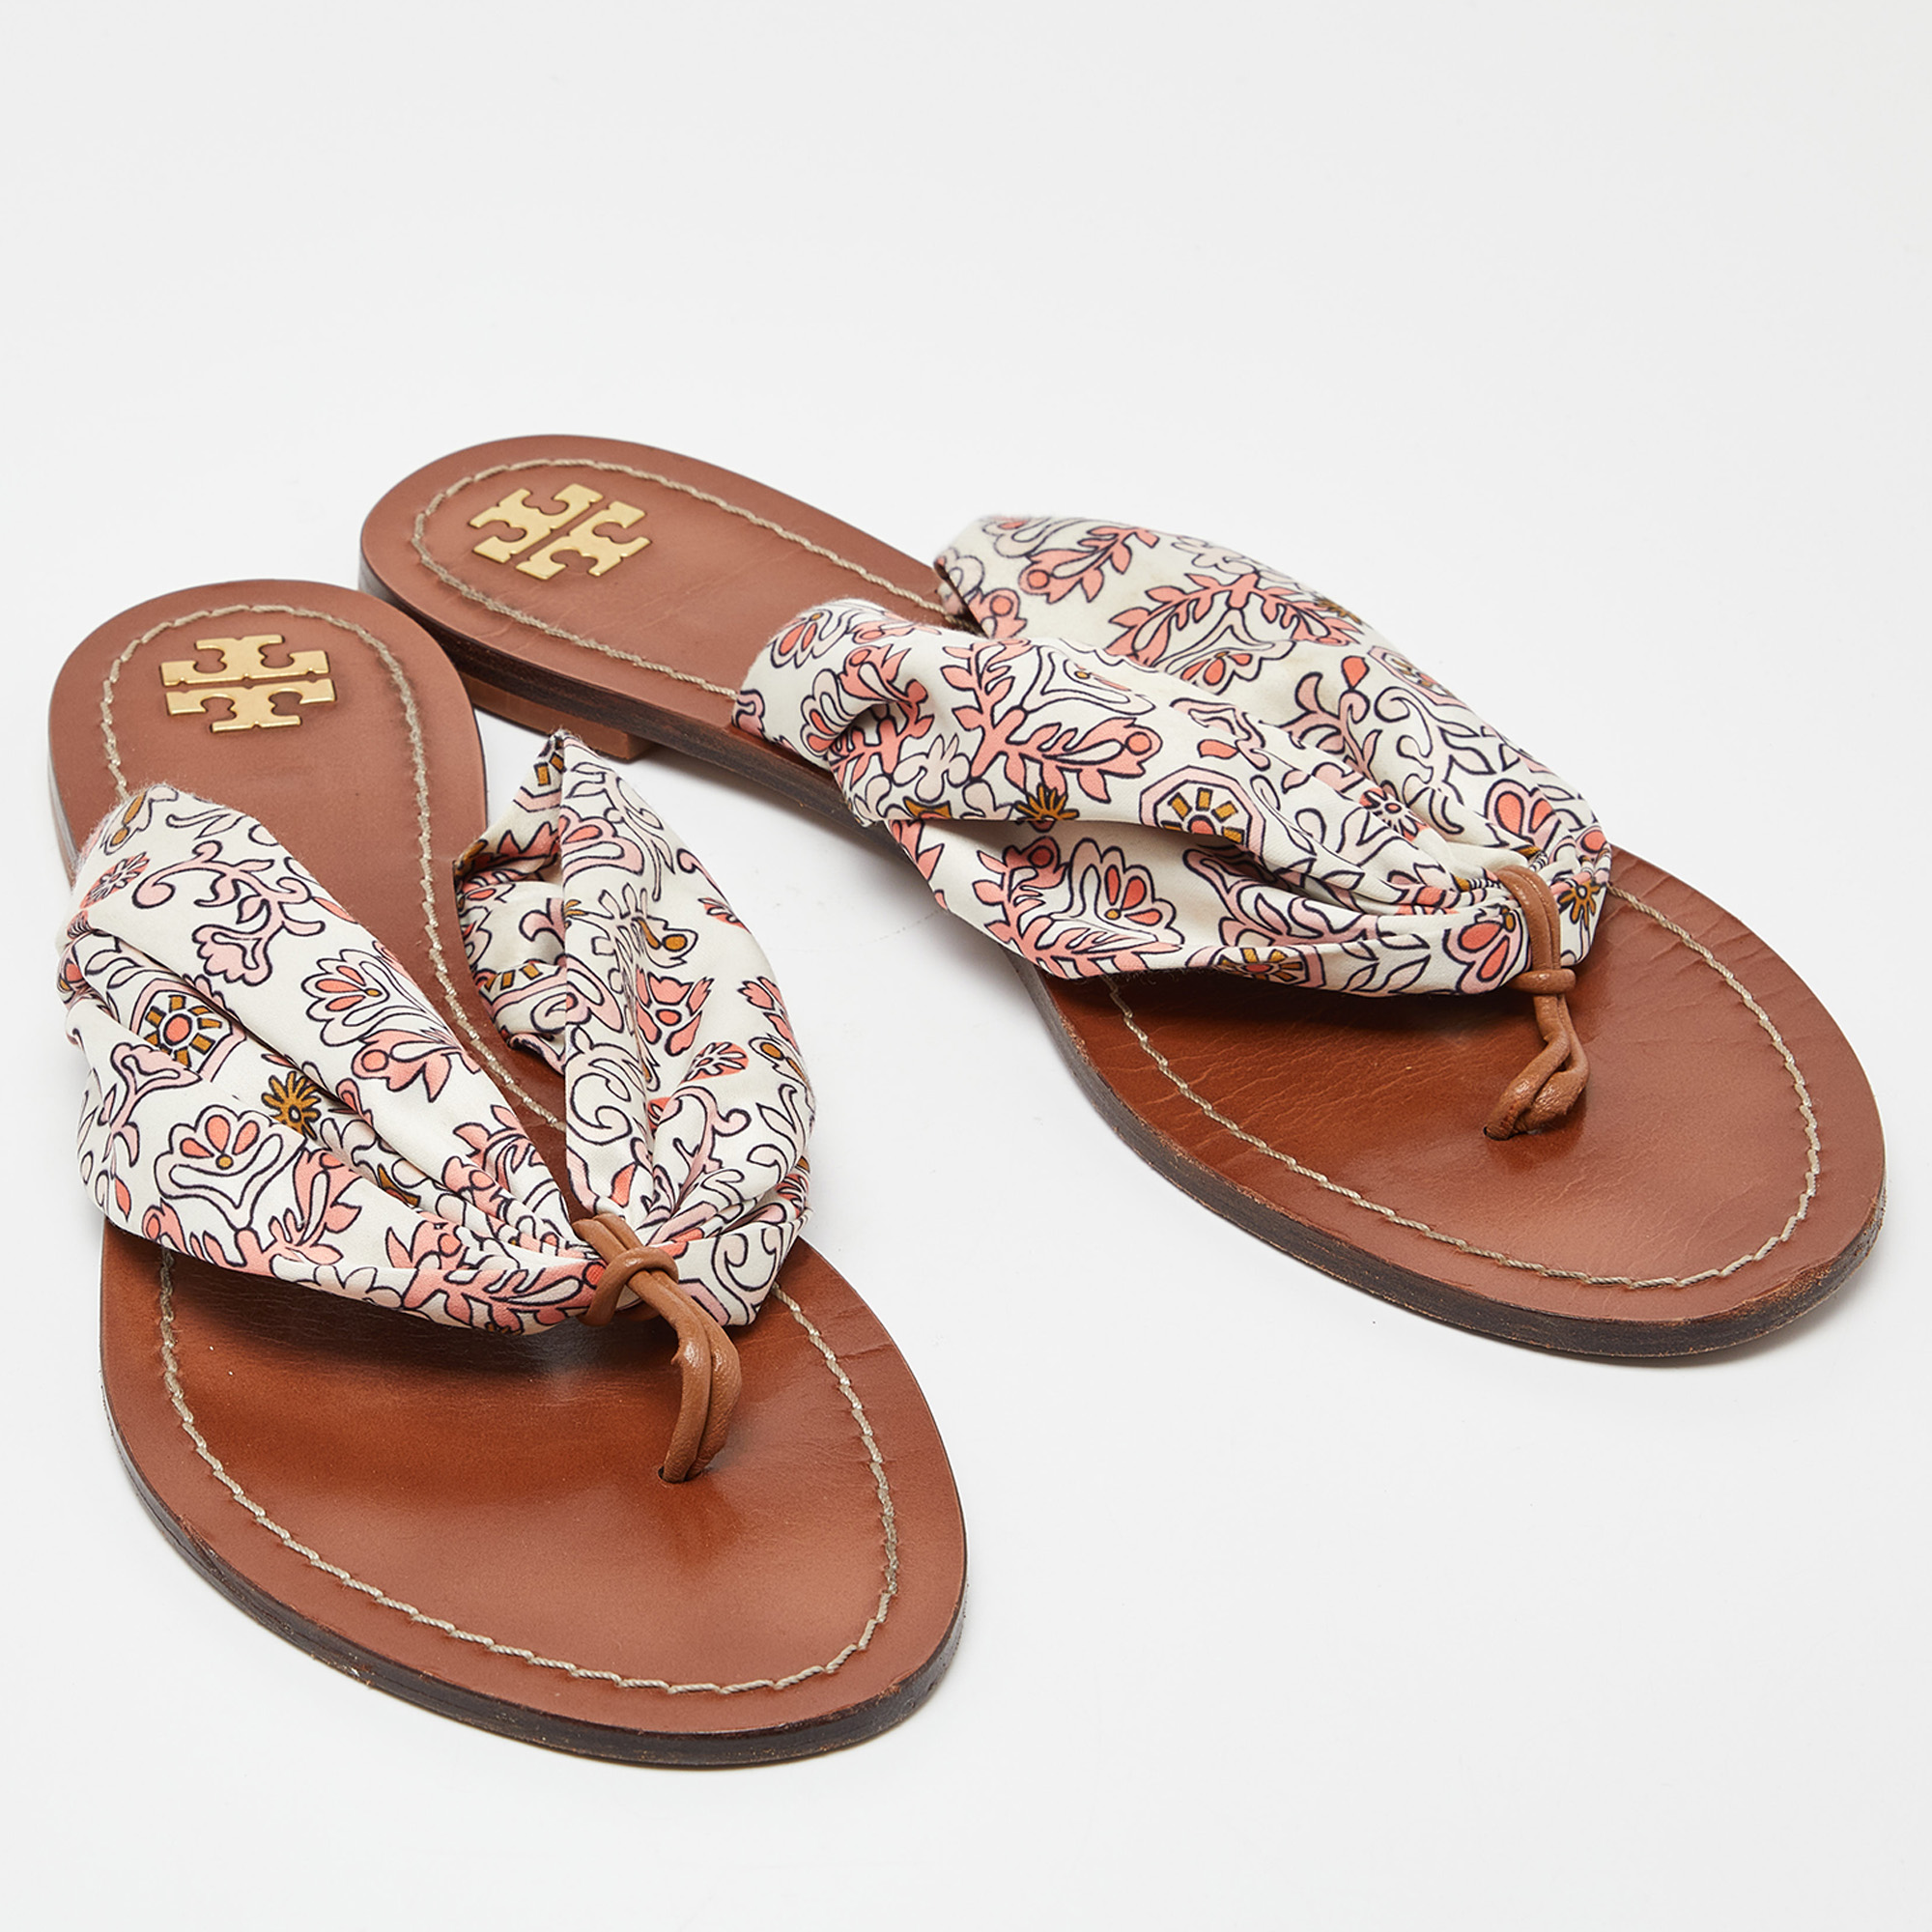 Tory Burch Multicolor Print Satin Carson Thong Sandals Size 41